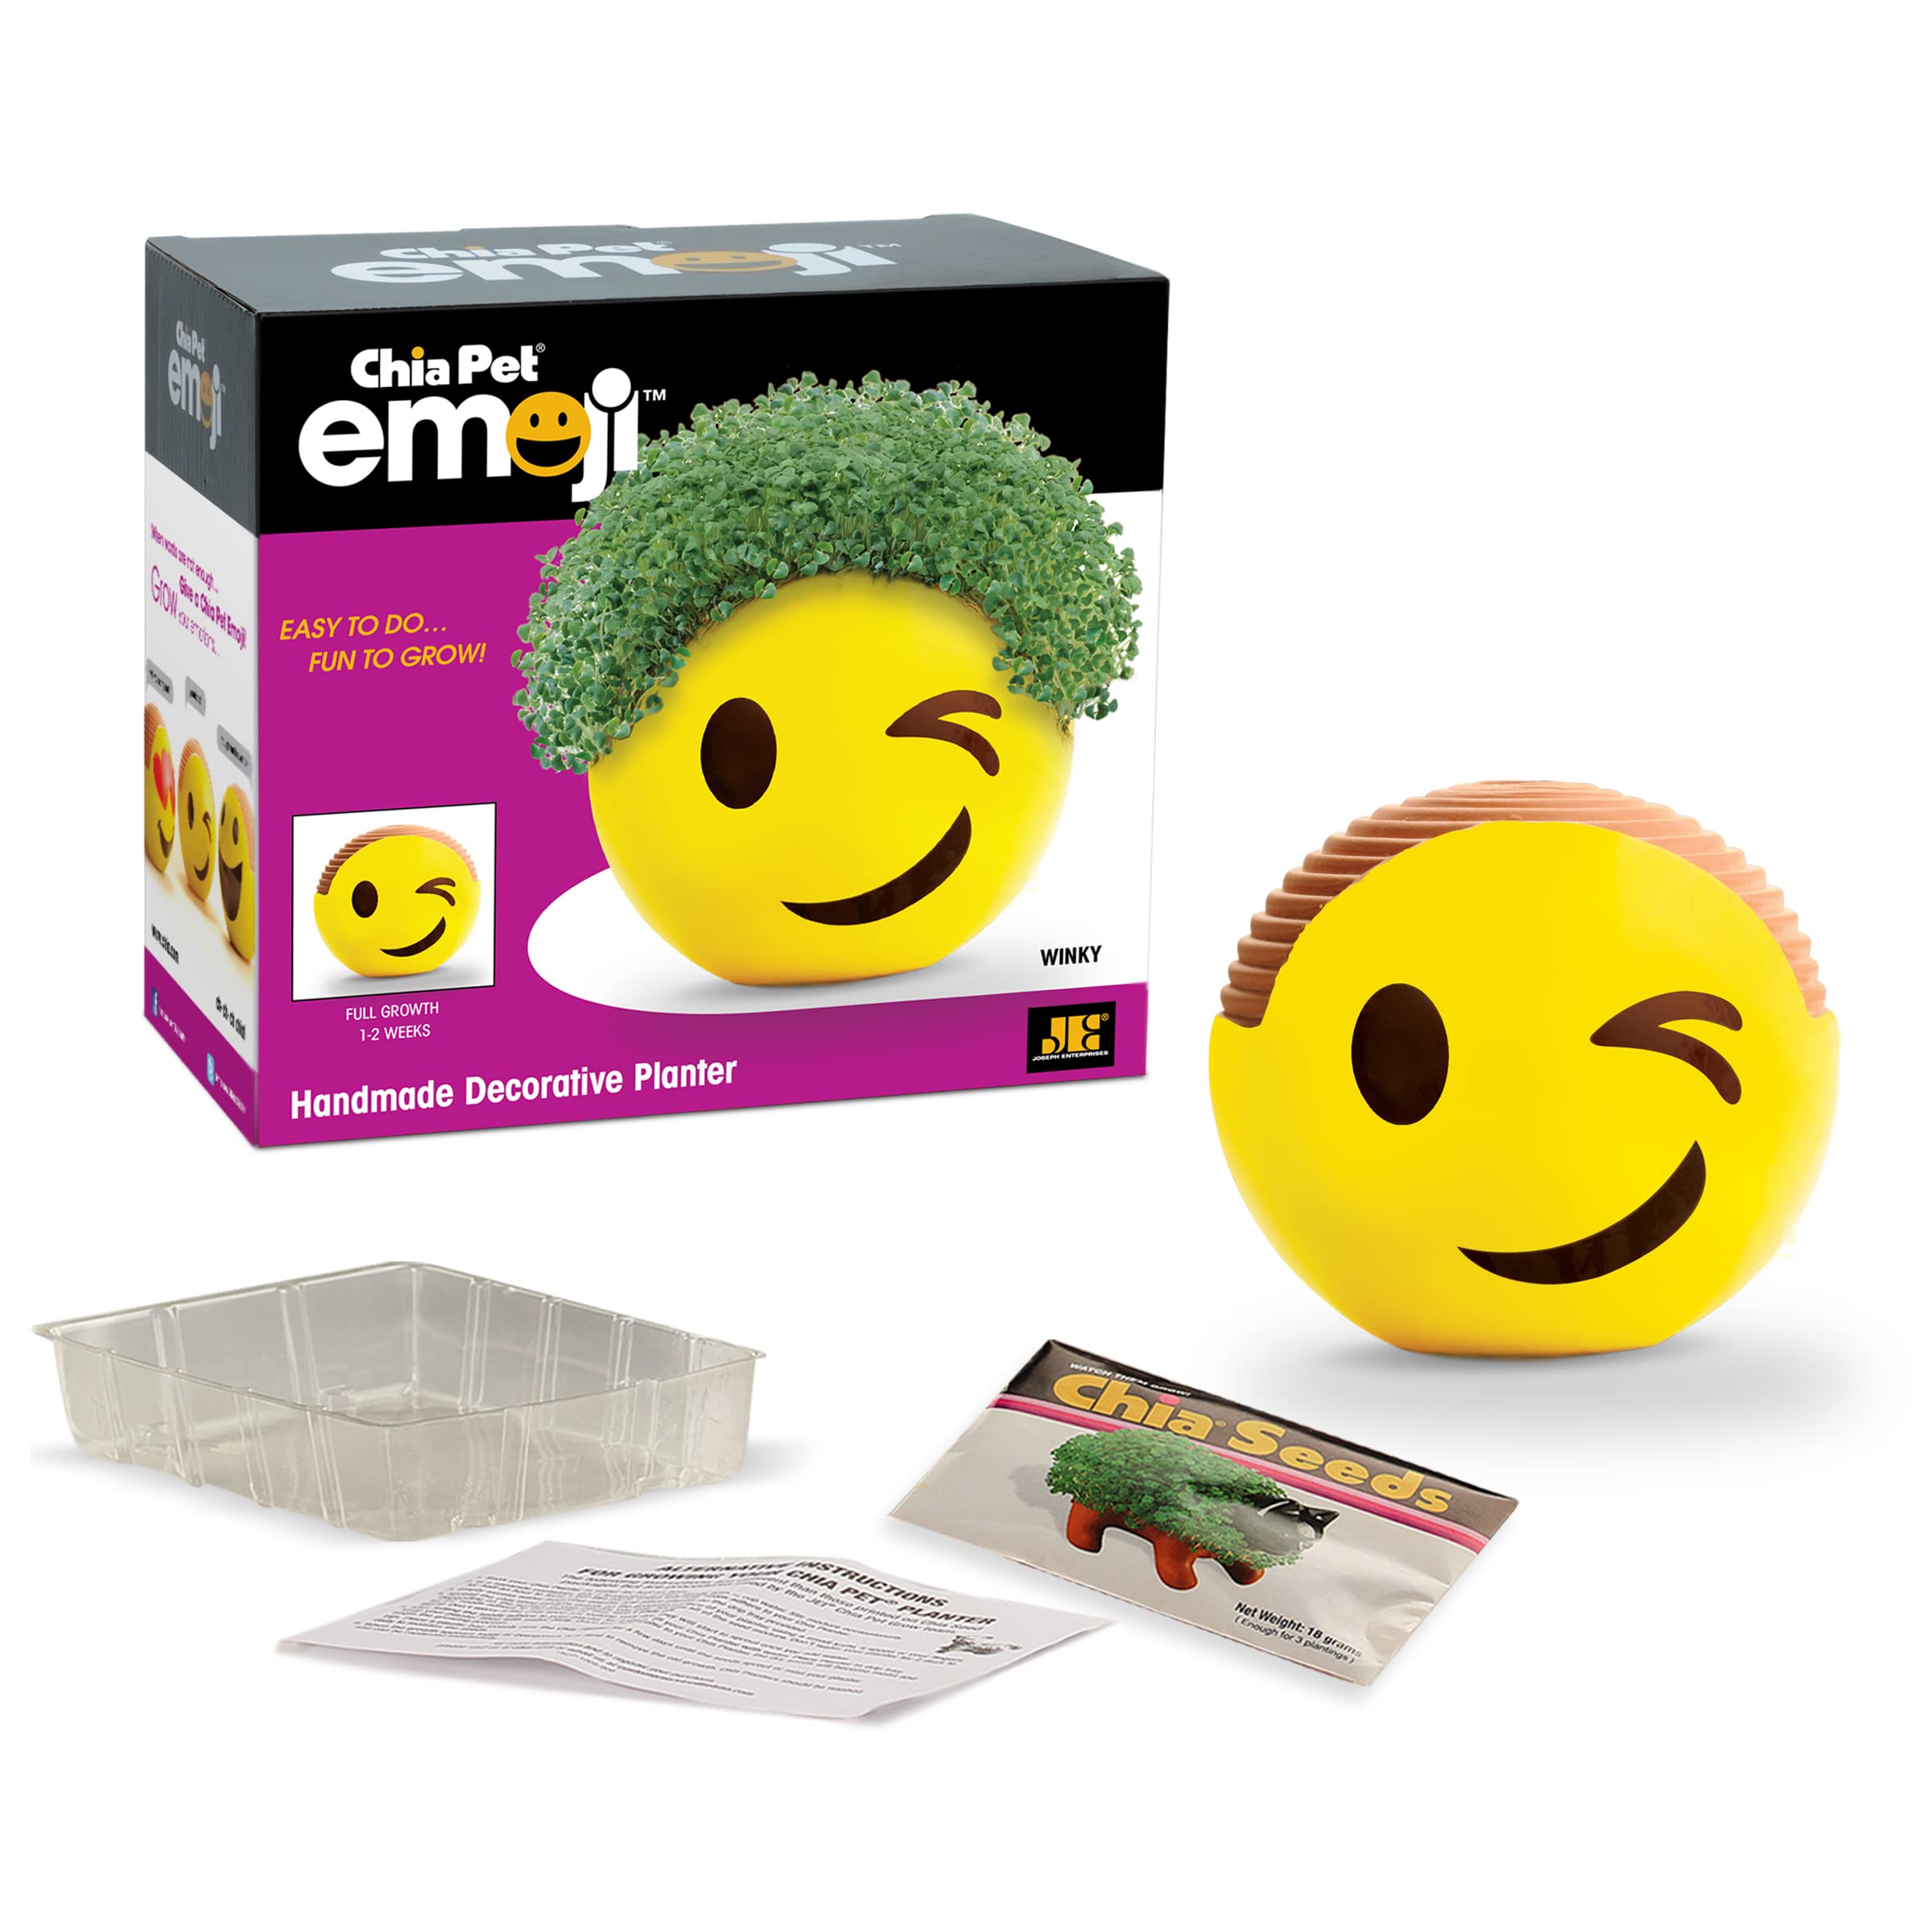 Chia pet emoji winky with seed pack decorative pottery planter easy to do and fun to grow novelty gift perfect for any occasion toys games